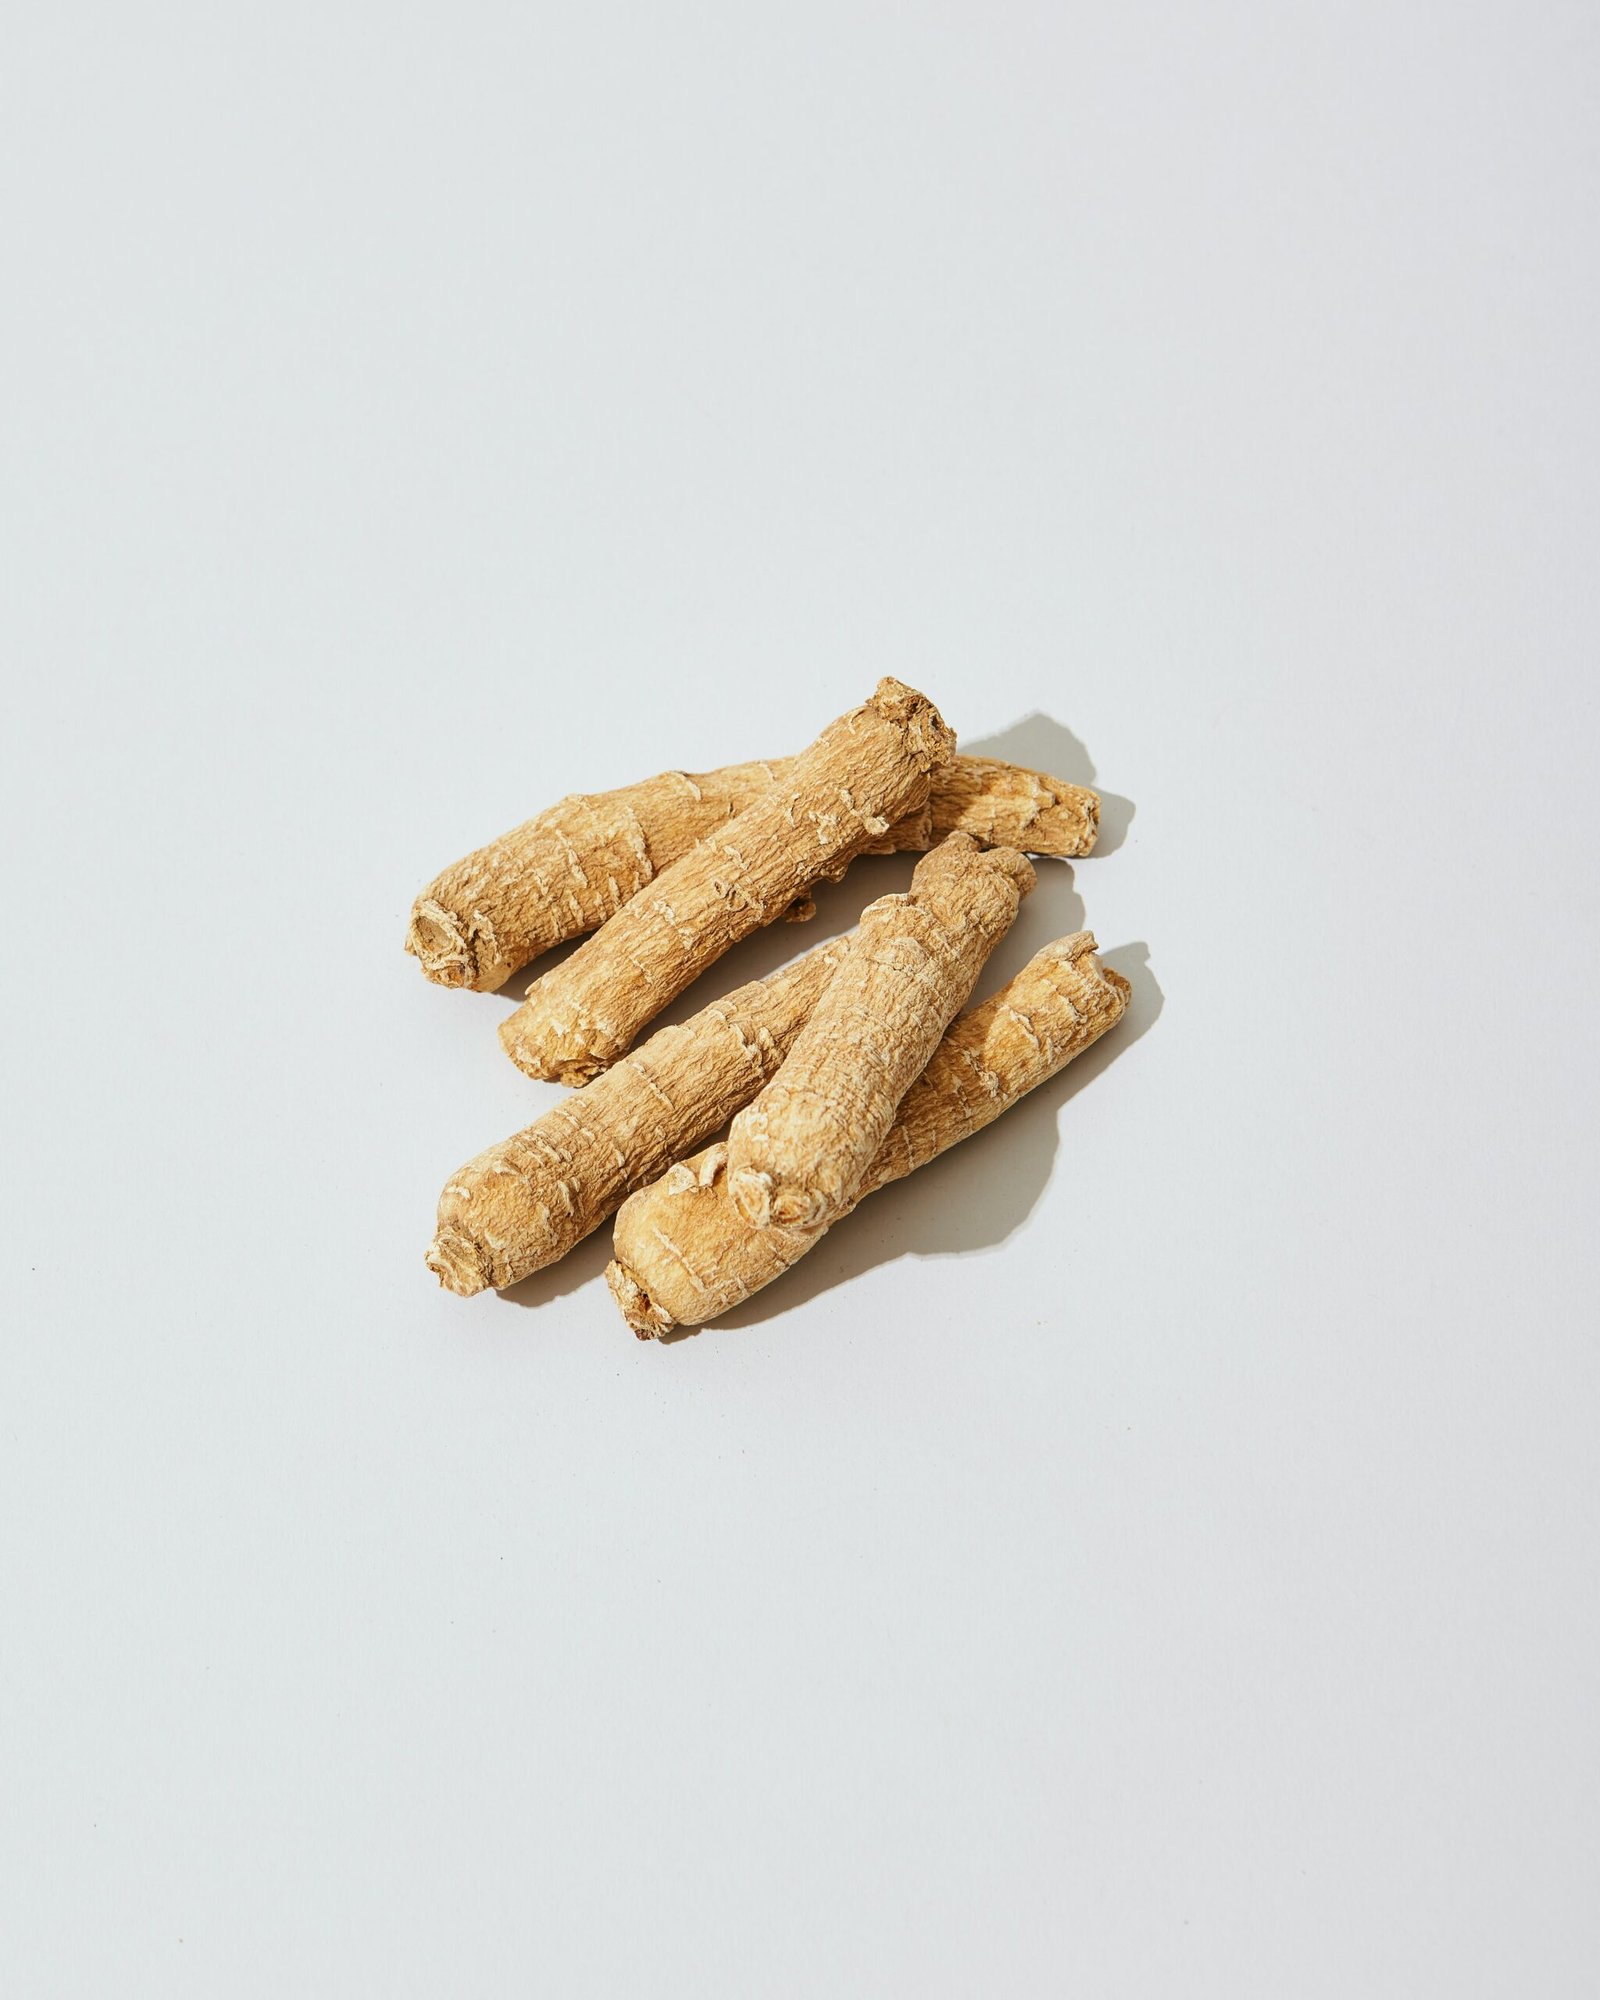 three pieces of ginger on a white surface